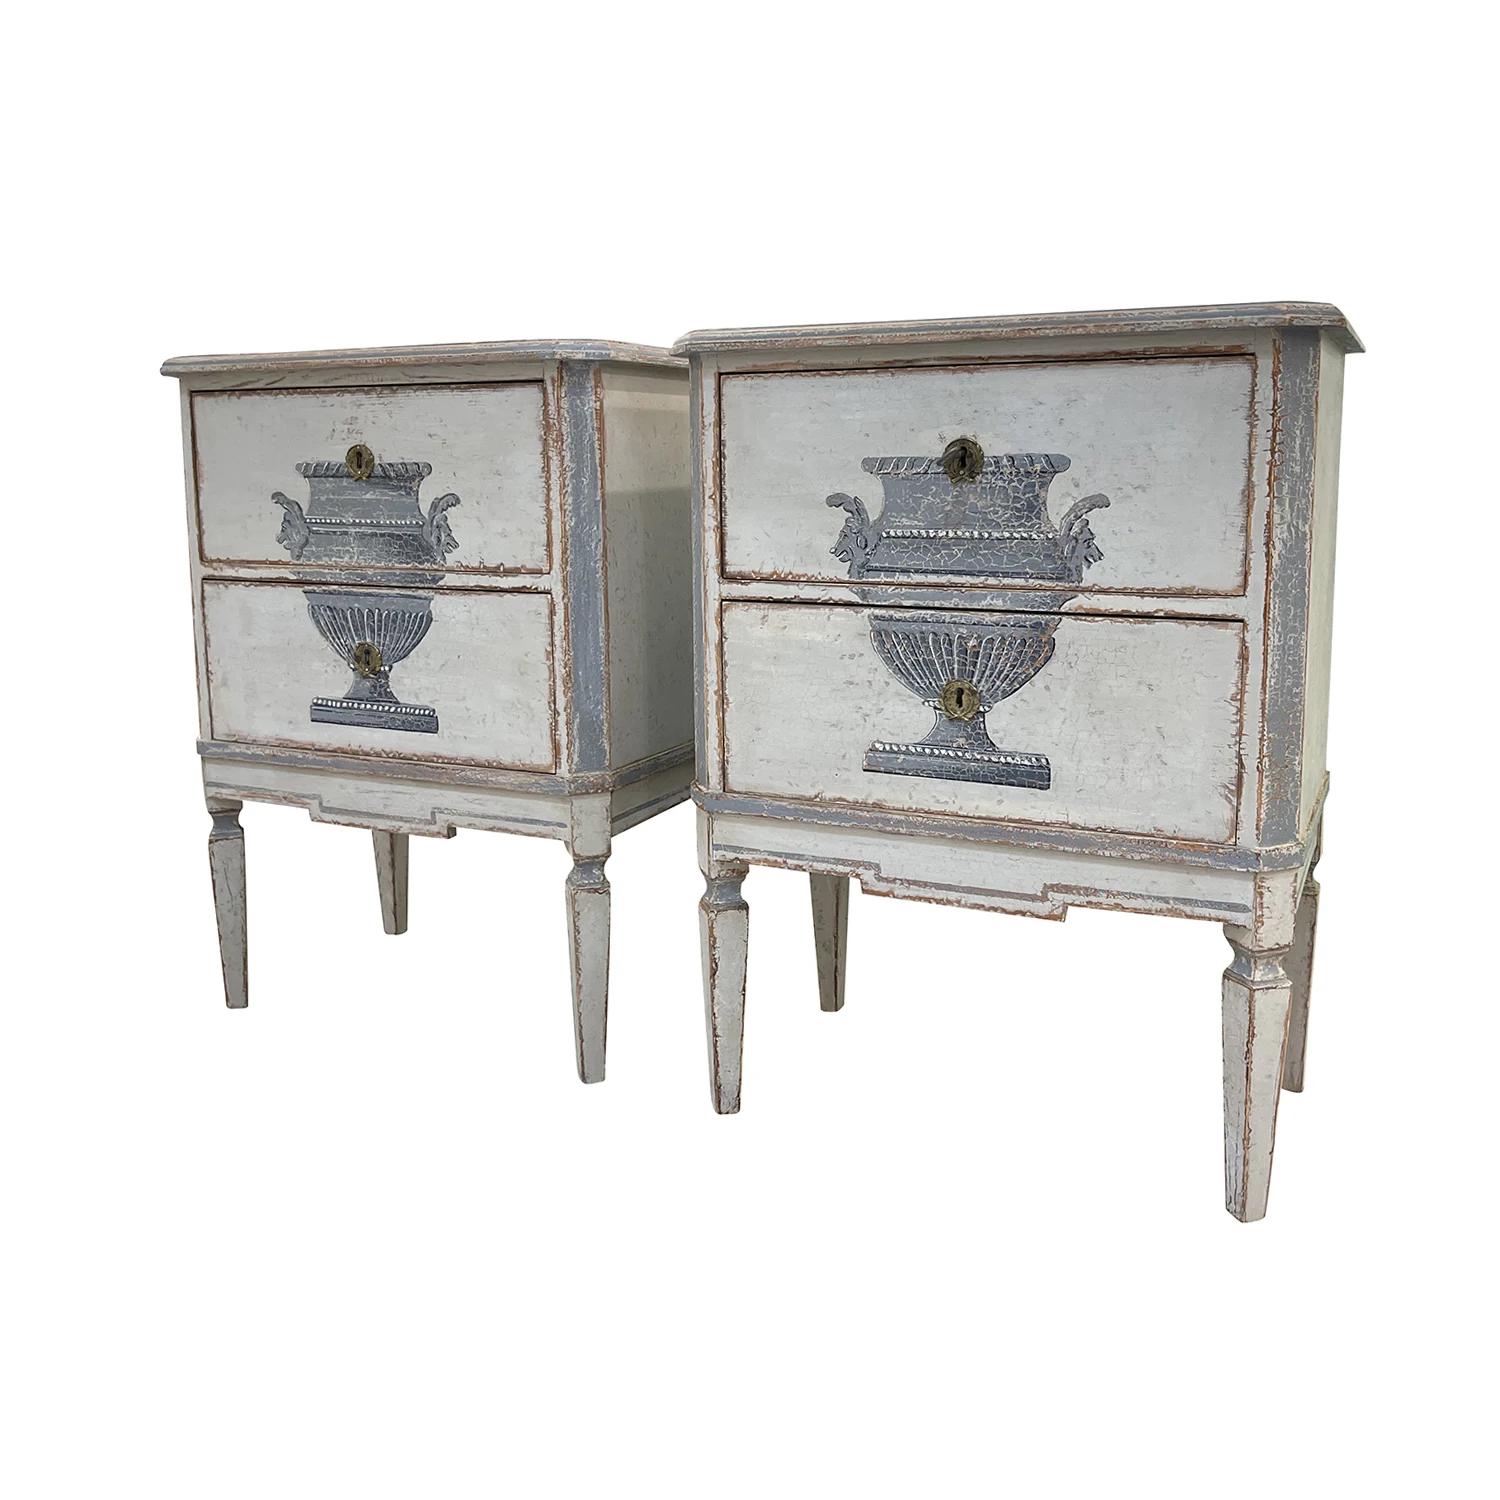 An antique Swedish Gustavian pair of nightstands made of handcrafted Pinewood, in good condition. The detailed Scandinavian bedside tables are composed with two drawers and standing on four square-pointed wooden legs. They are enhanced by painted